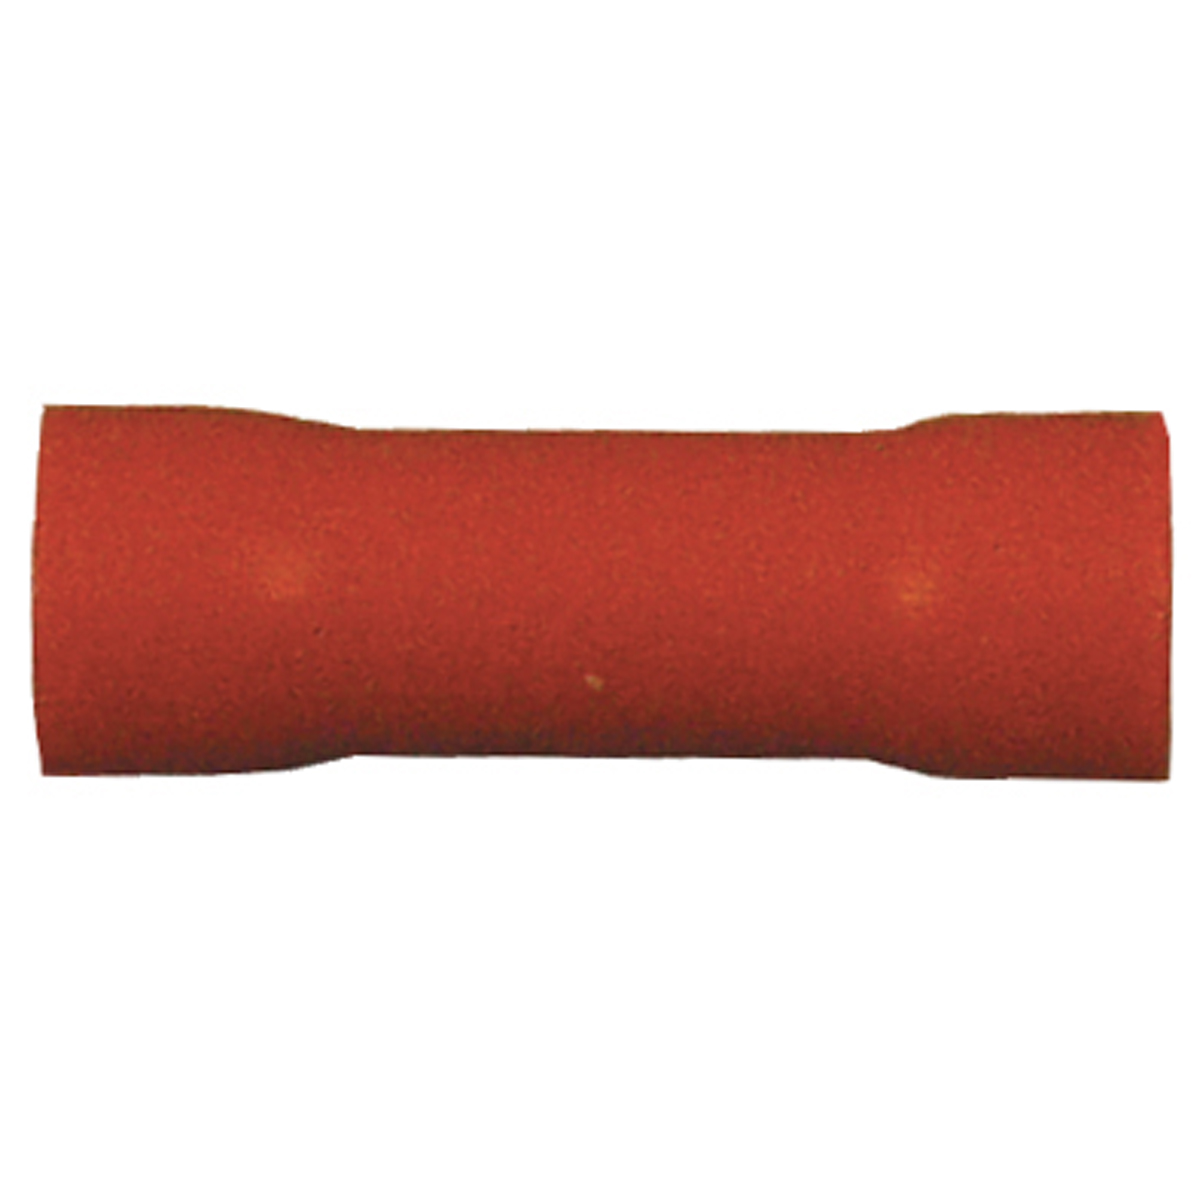 PVC Insulated Butt Connector 22-18 Gauge - 10 Pack